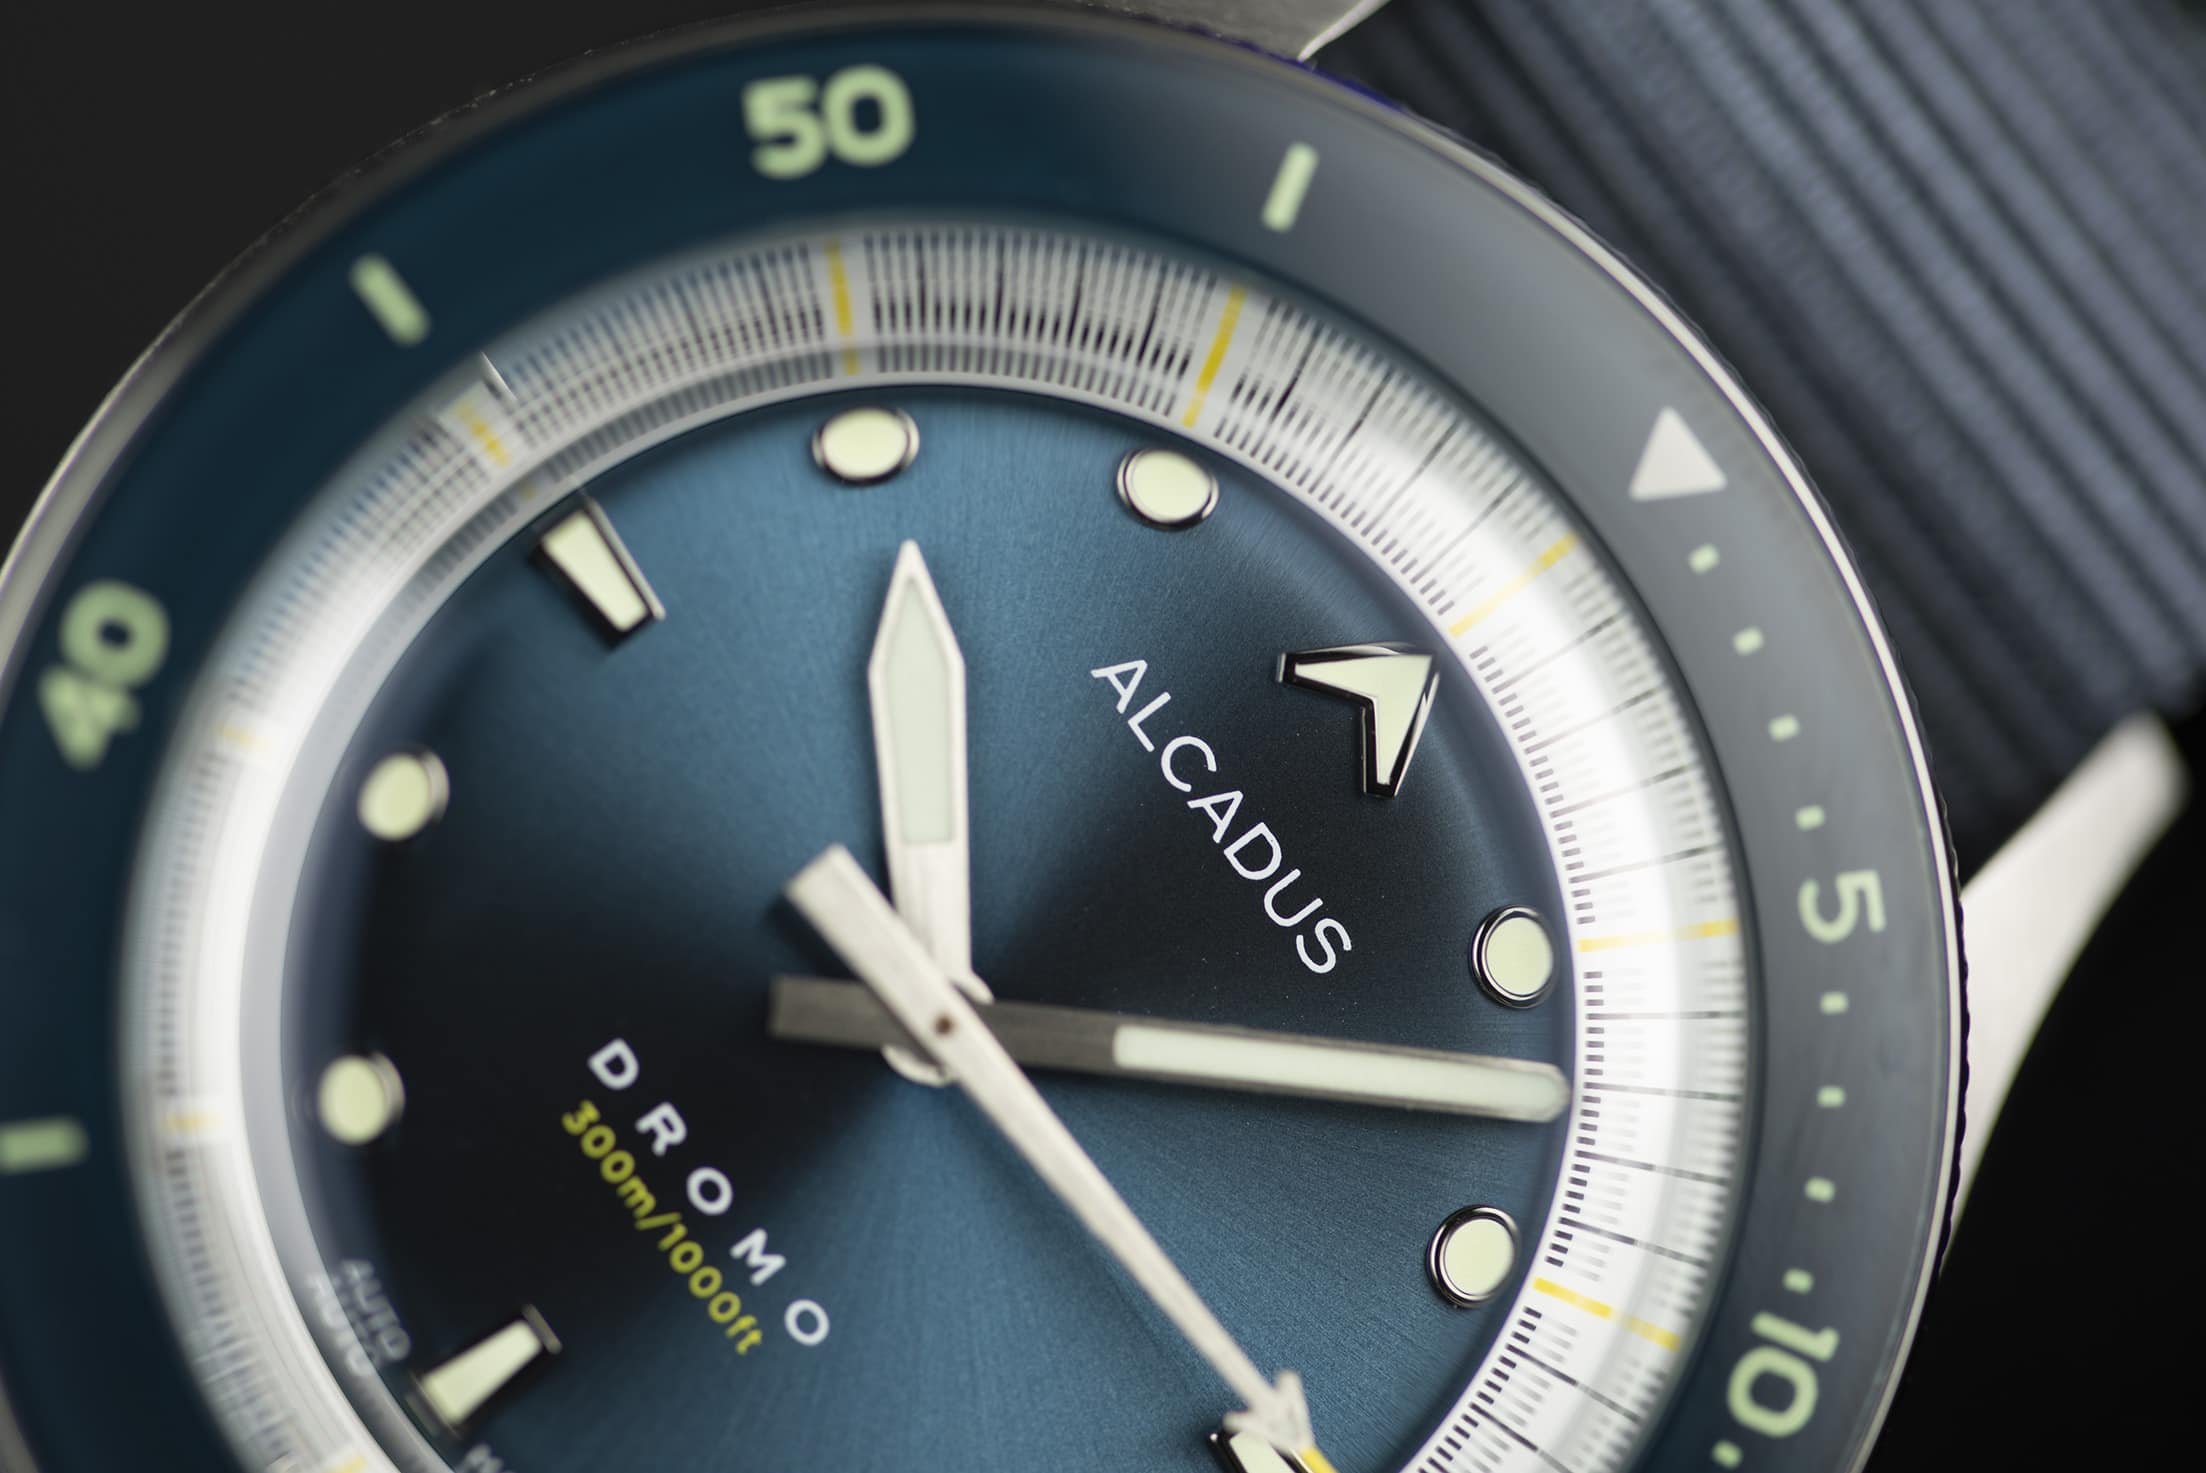 Hands On With The ??Charming Alcadus Dromo Diver